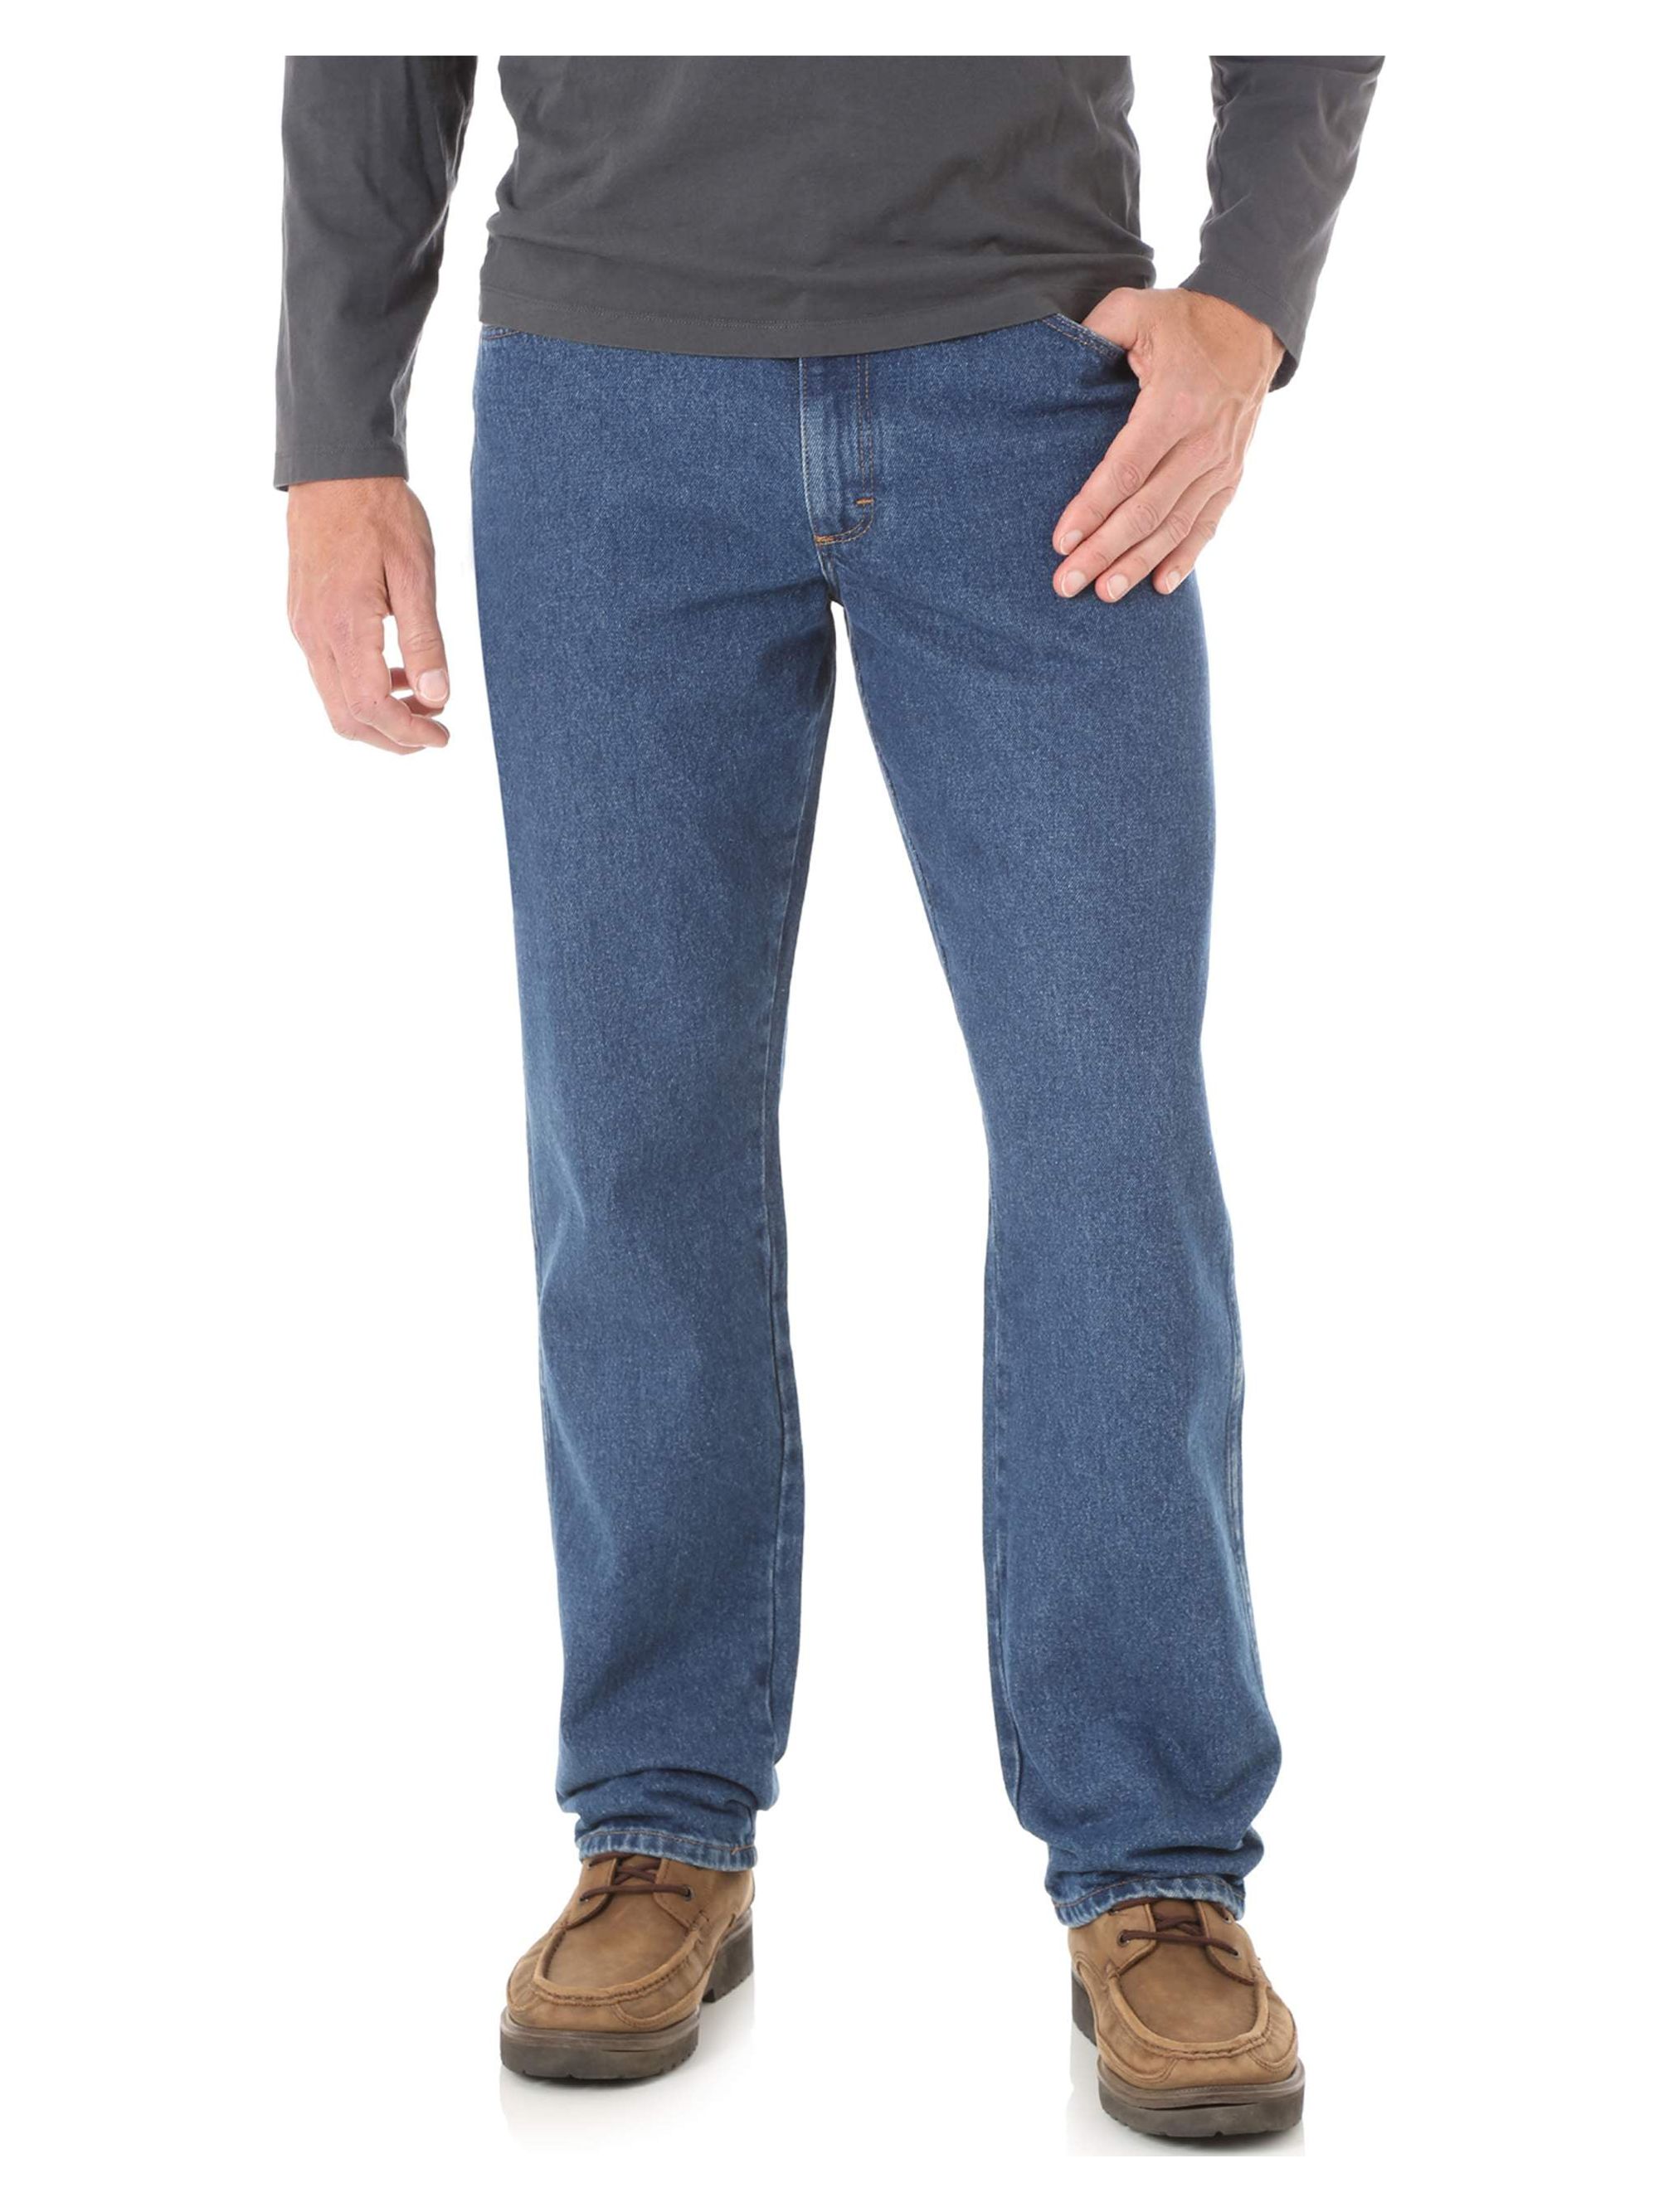 Wrangler Rustler Men's and Big Men's Relaxed Fit Jeans - image 1 of 4